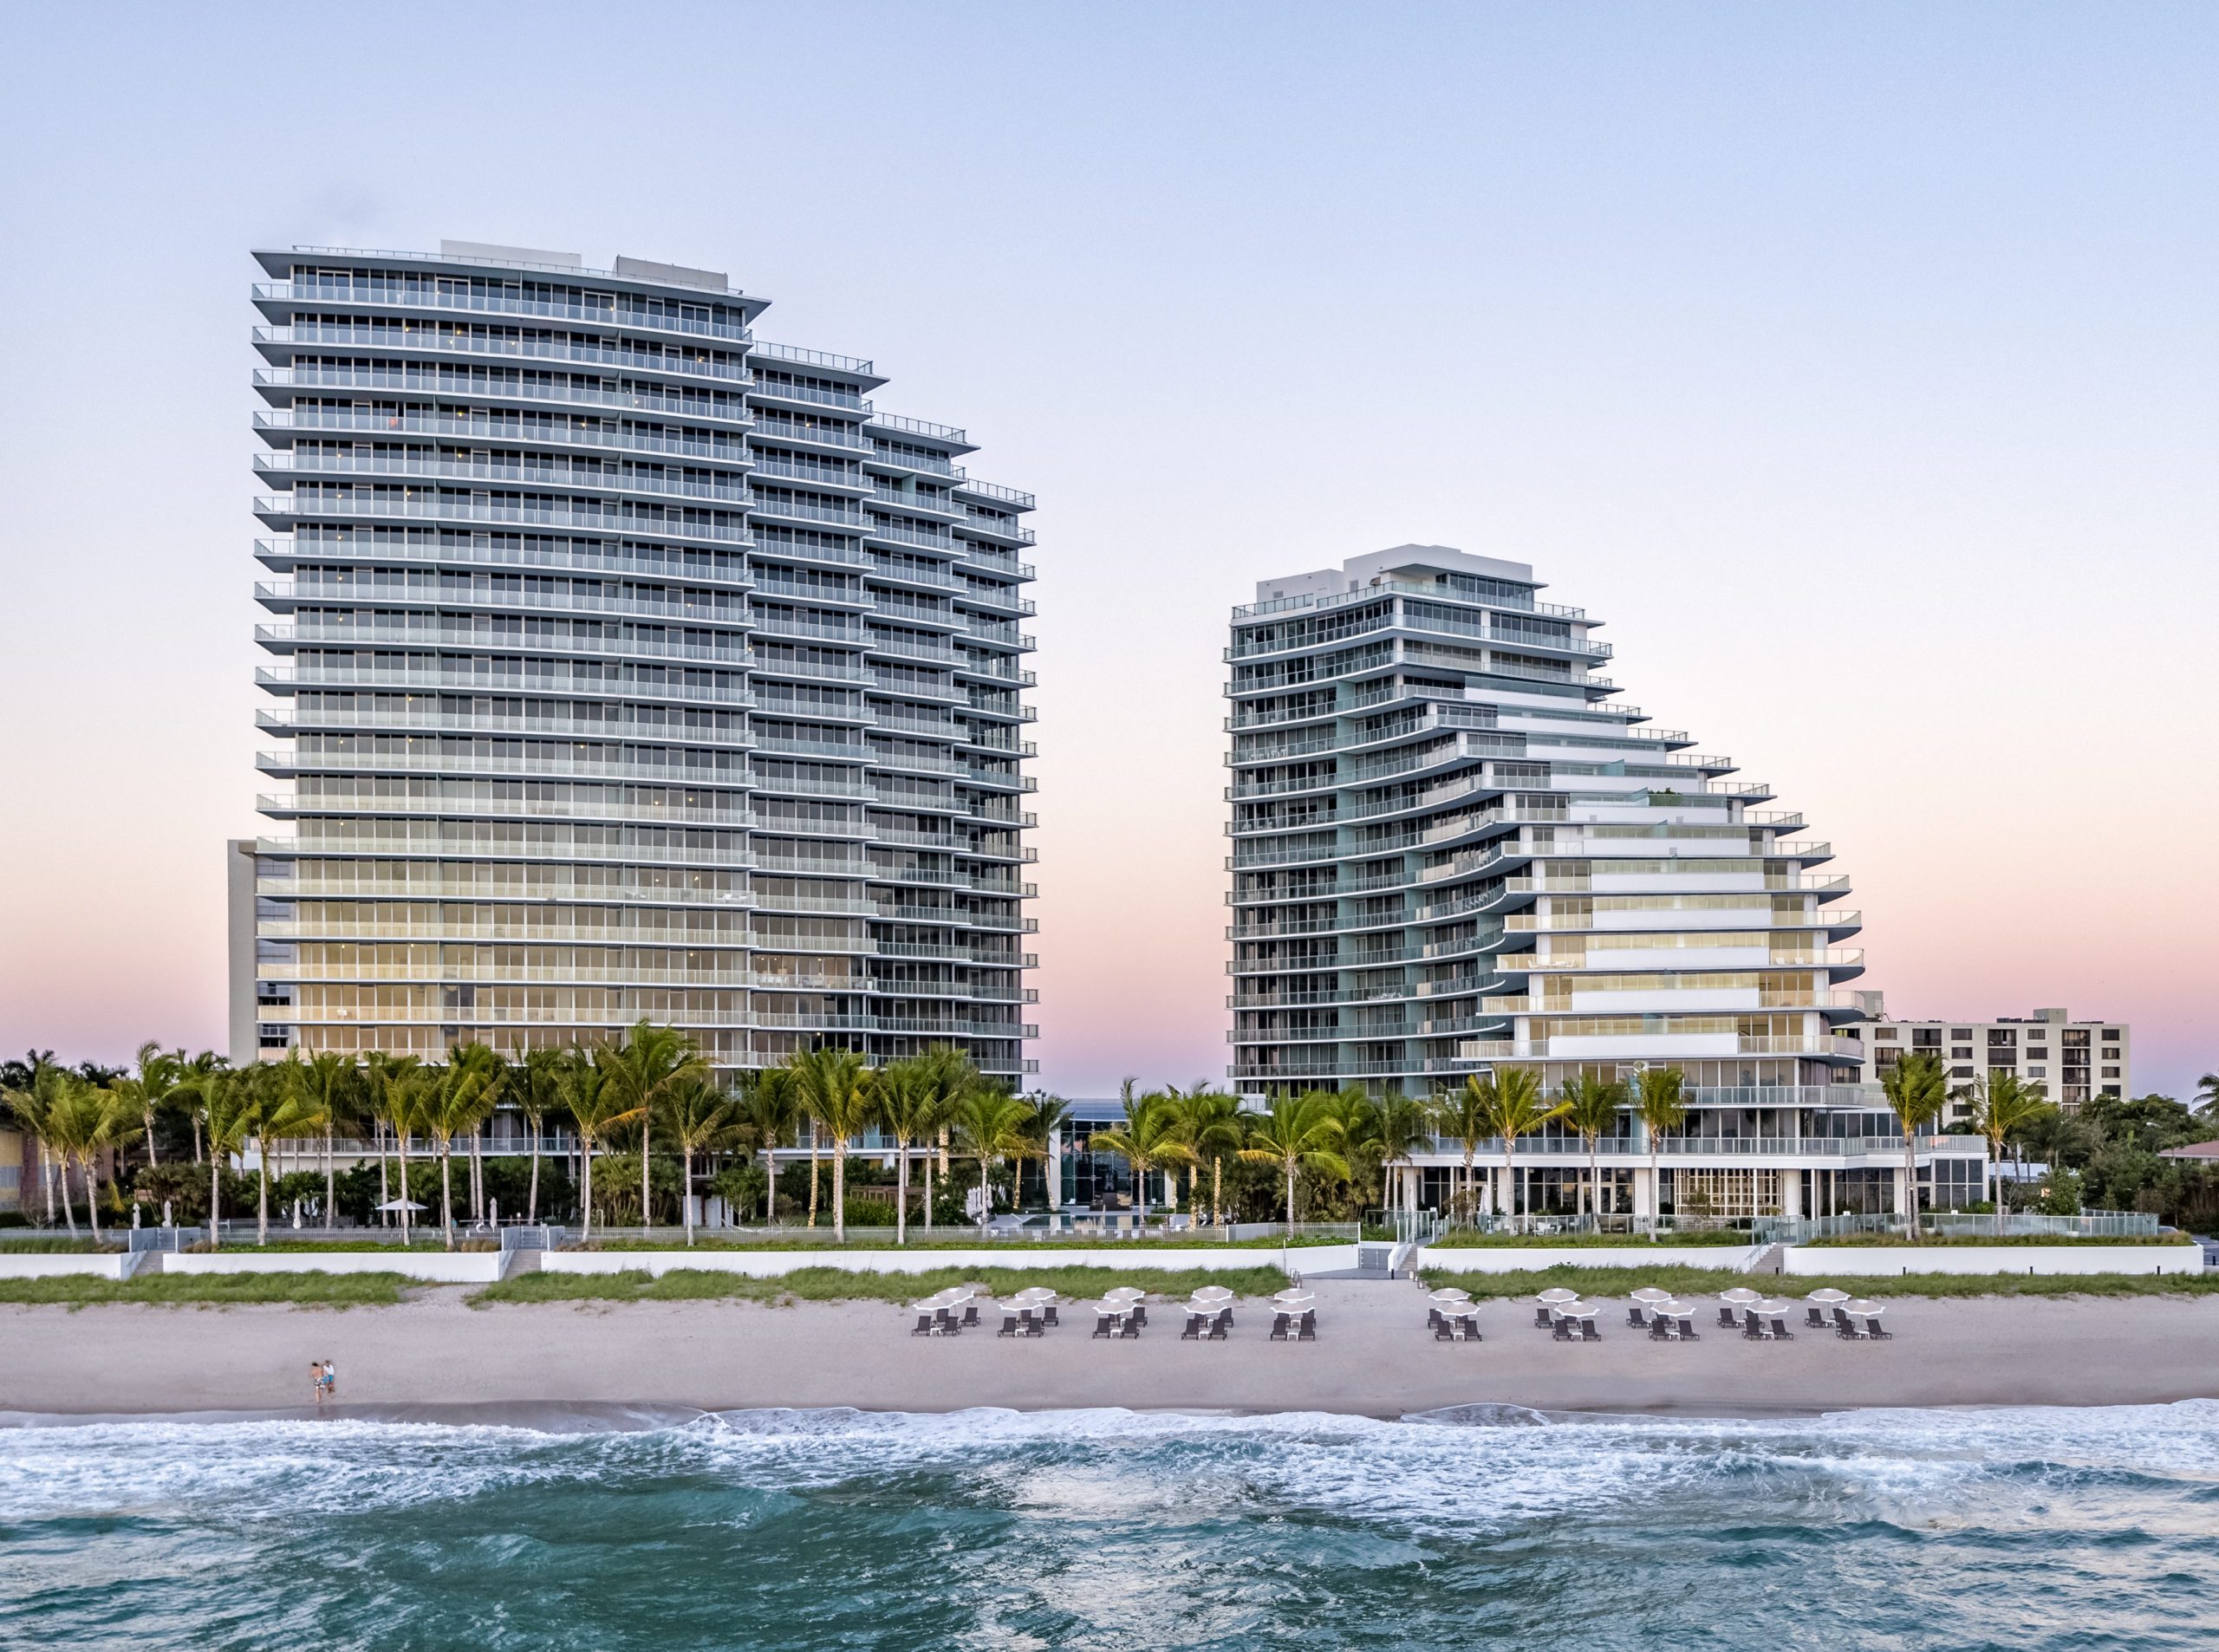 Auberge Fort Lauderdale For Sale: The Amenities at the Auberge Beach Residences and Spa